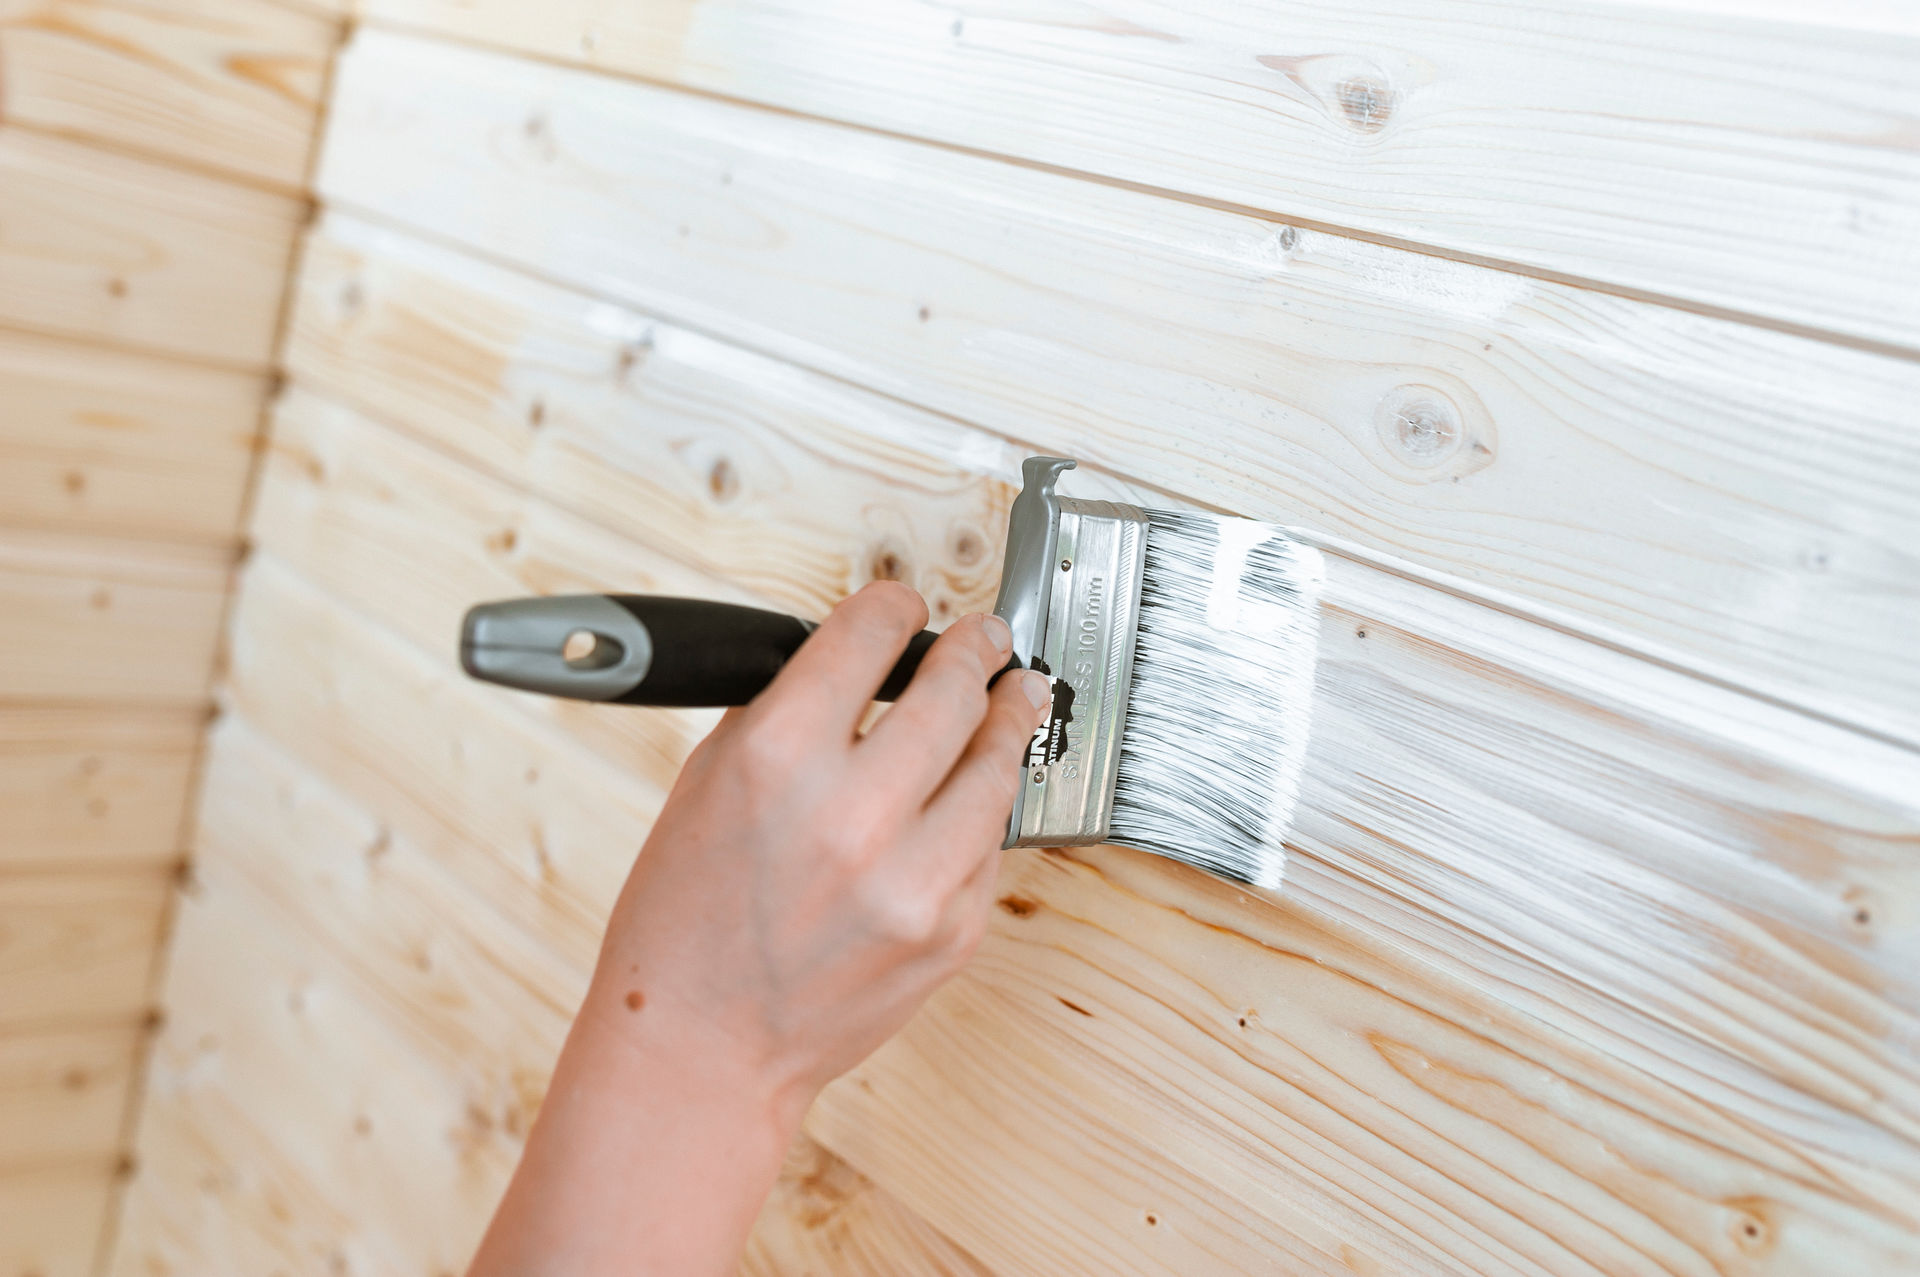 Wood Panel Wall - Check Best Ideas on How to Paint Wood Paneling